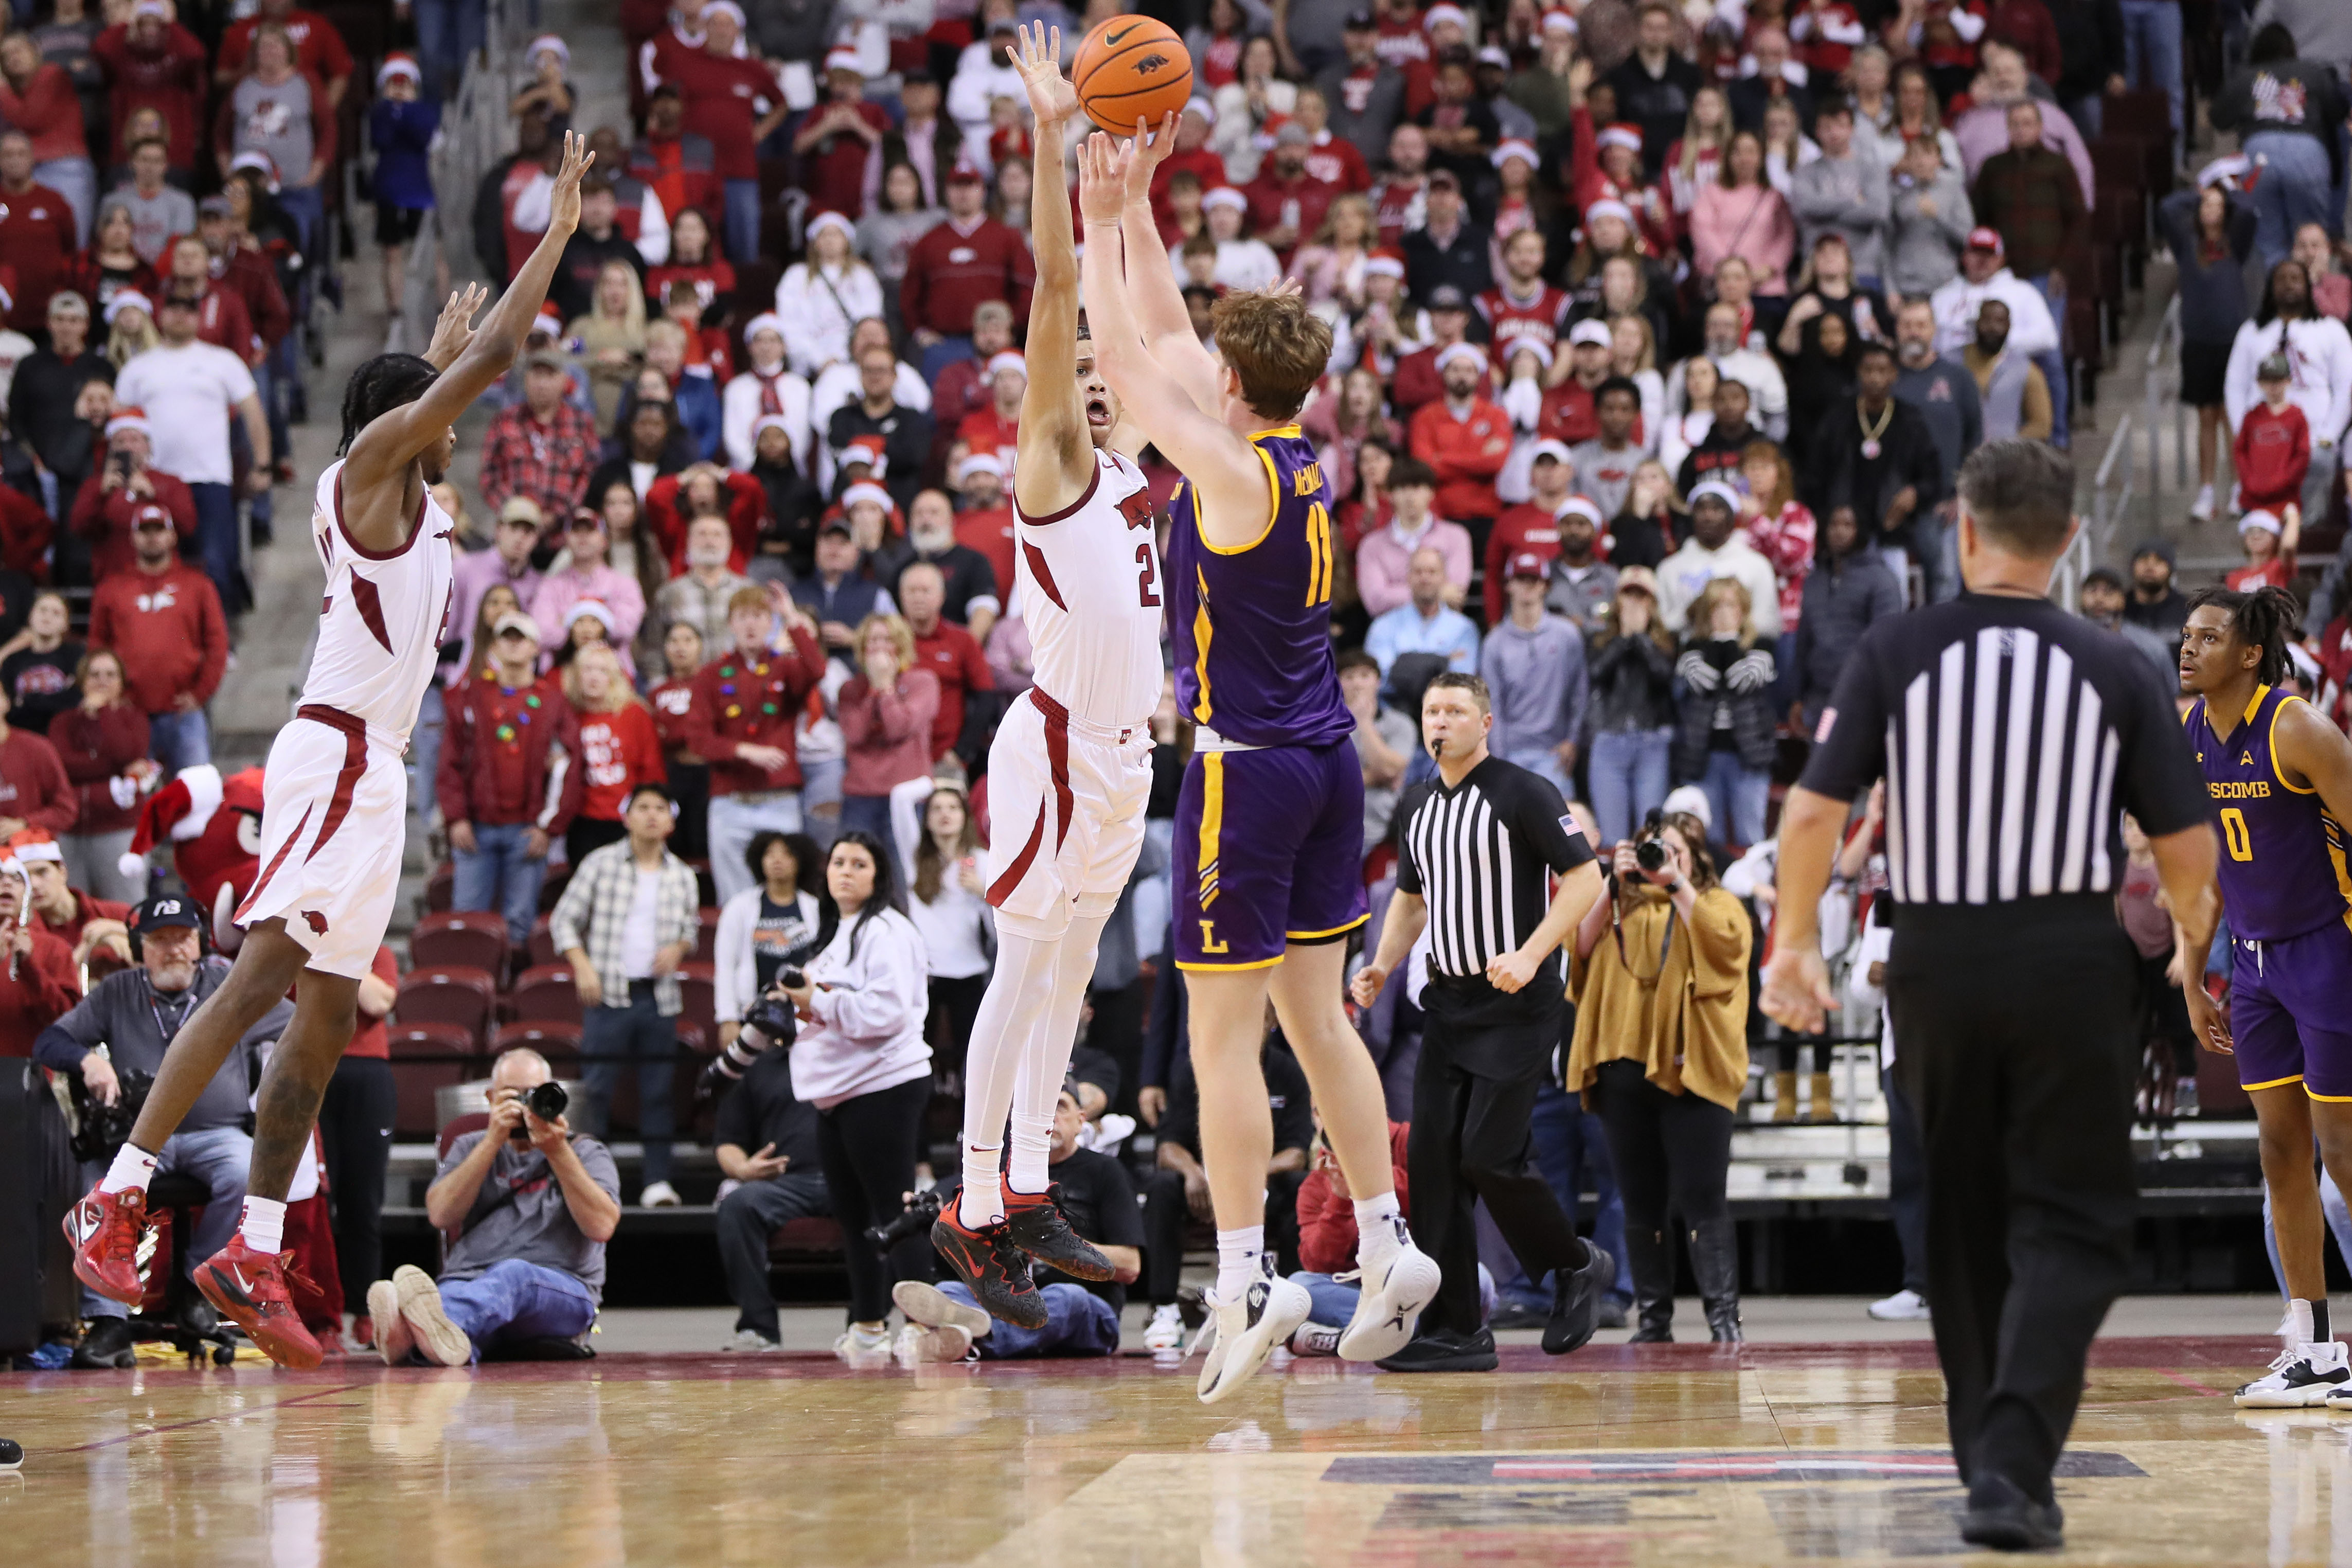 Arkansas Holds on for 69-66 Victory Over Lipscomb